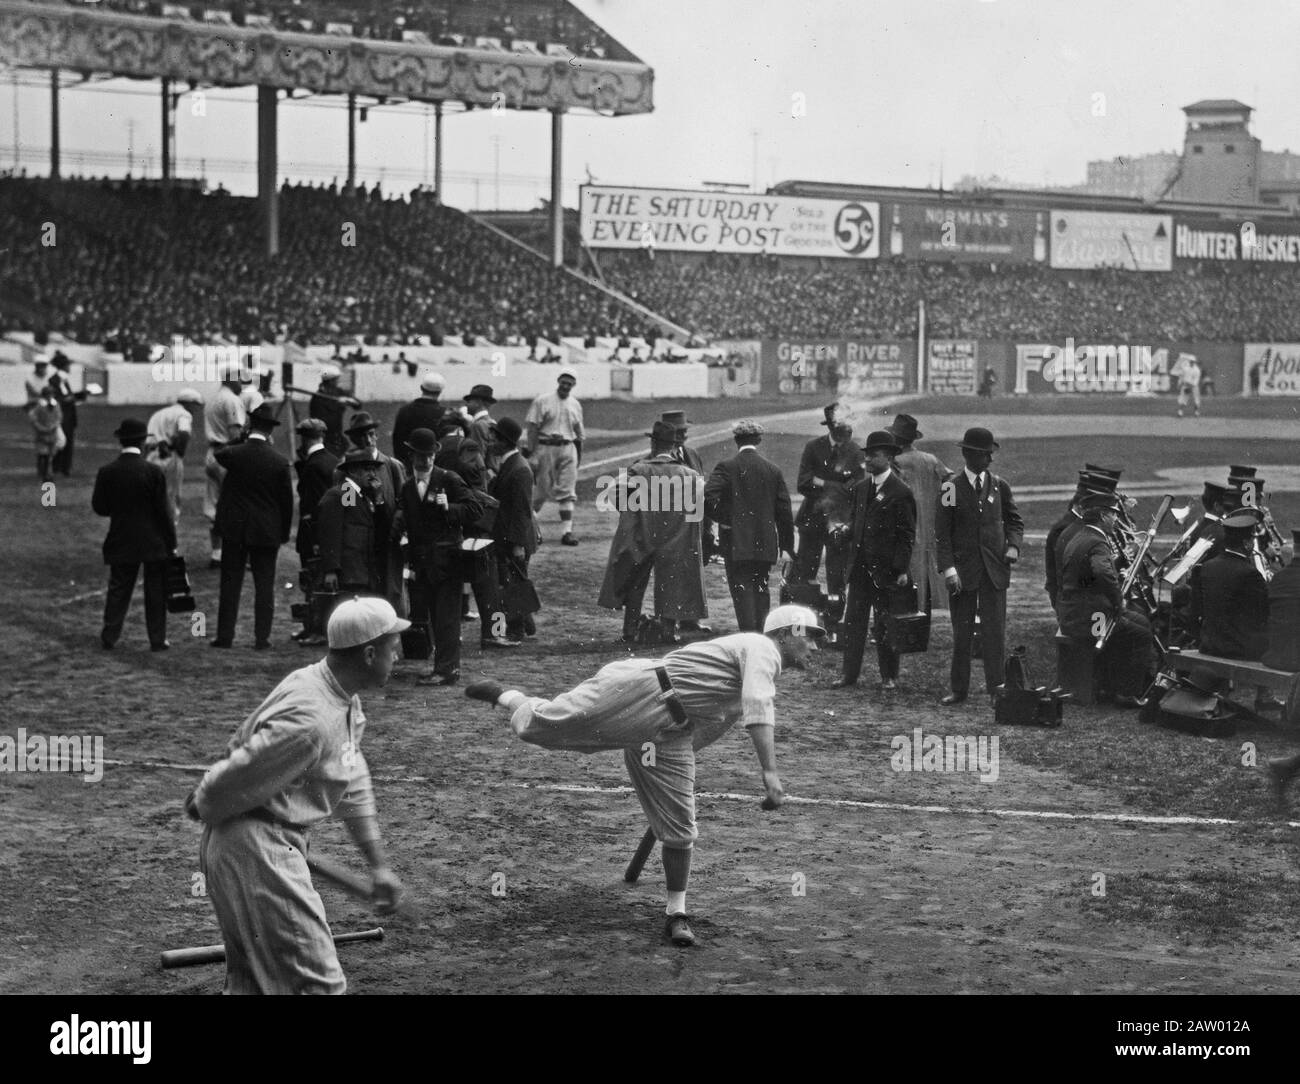 Baseball players warming up at the Polo Grounds - [1912] Stock Photo